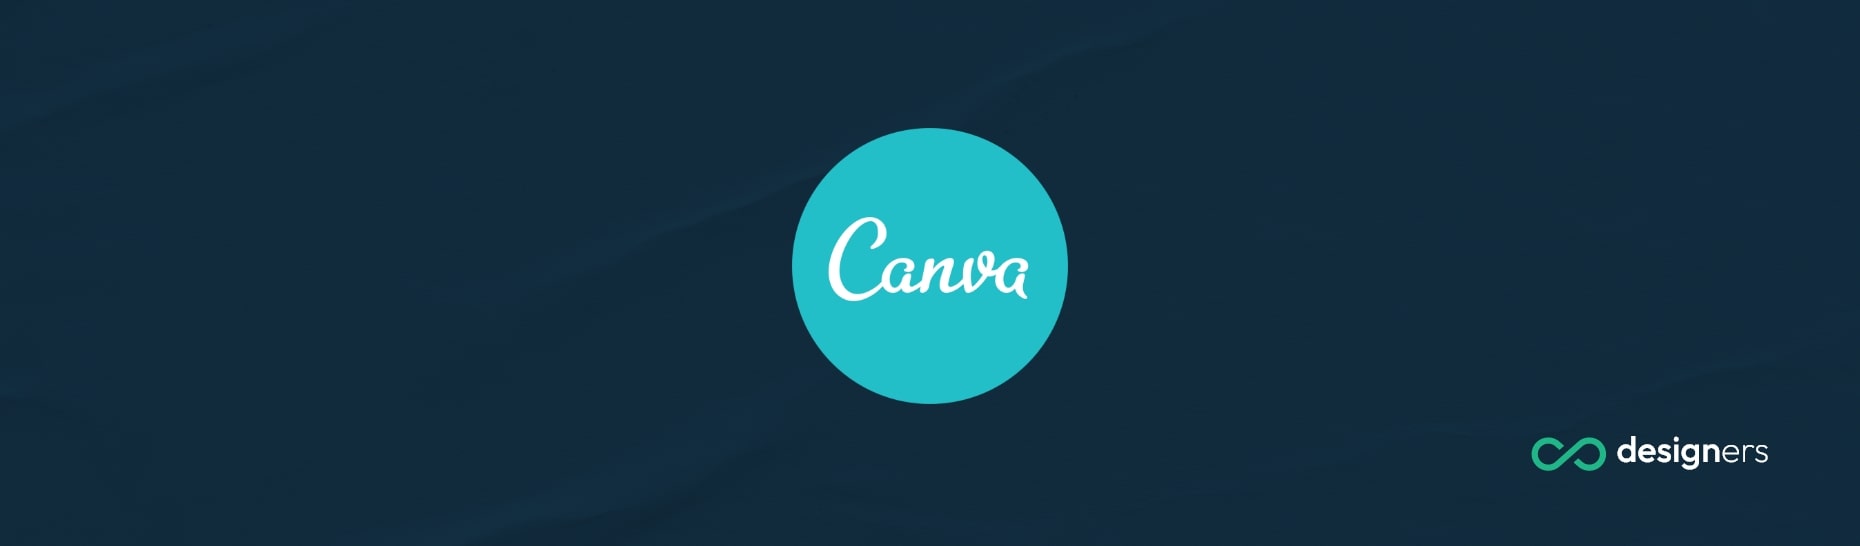 What Canva Is Used For?